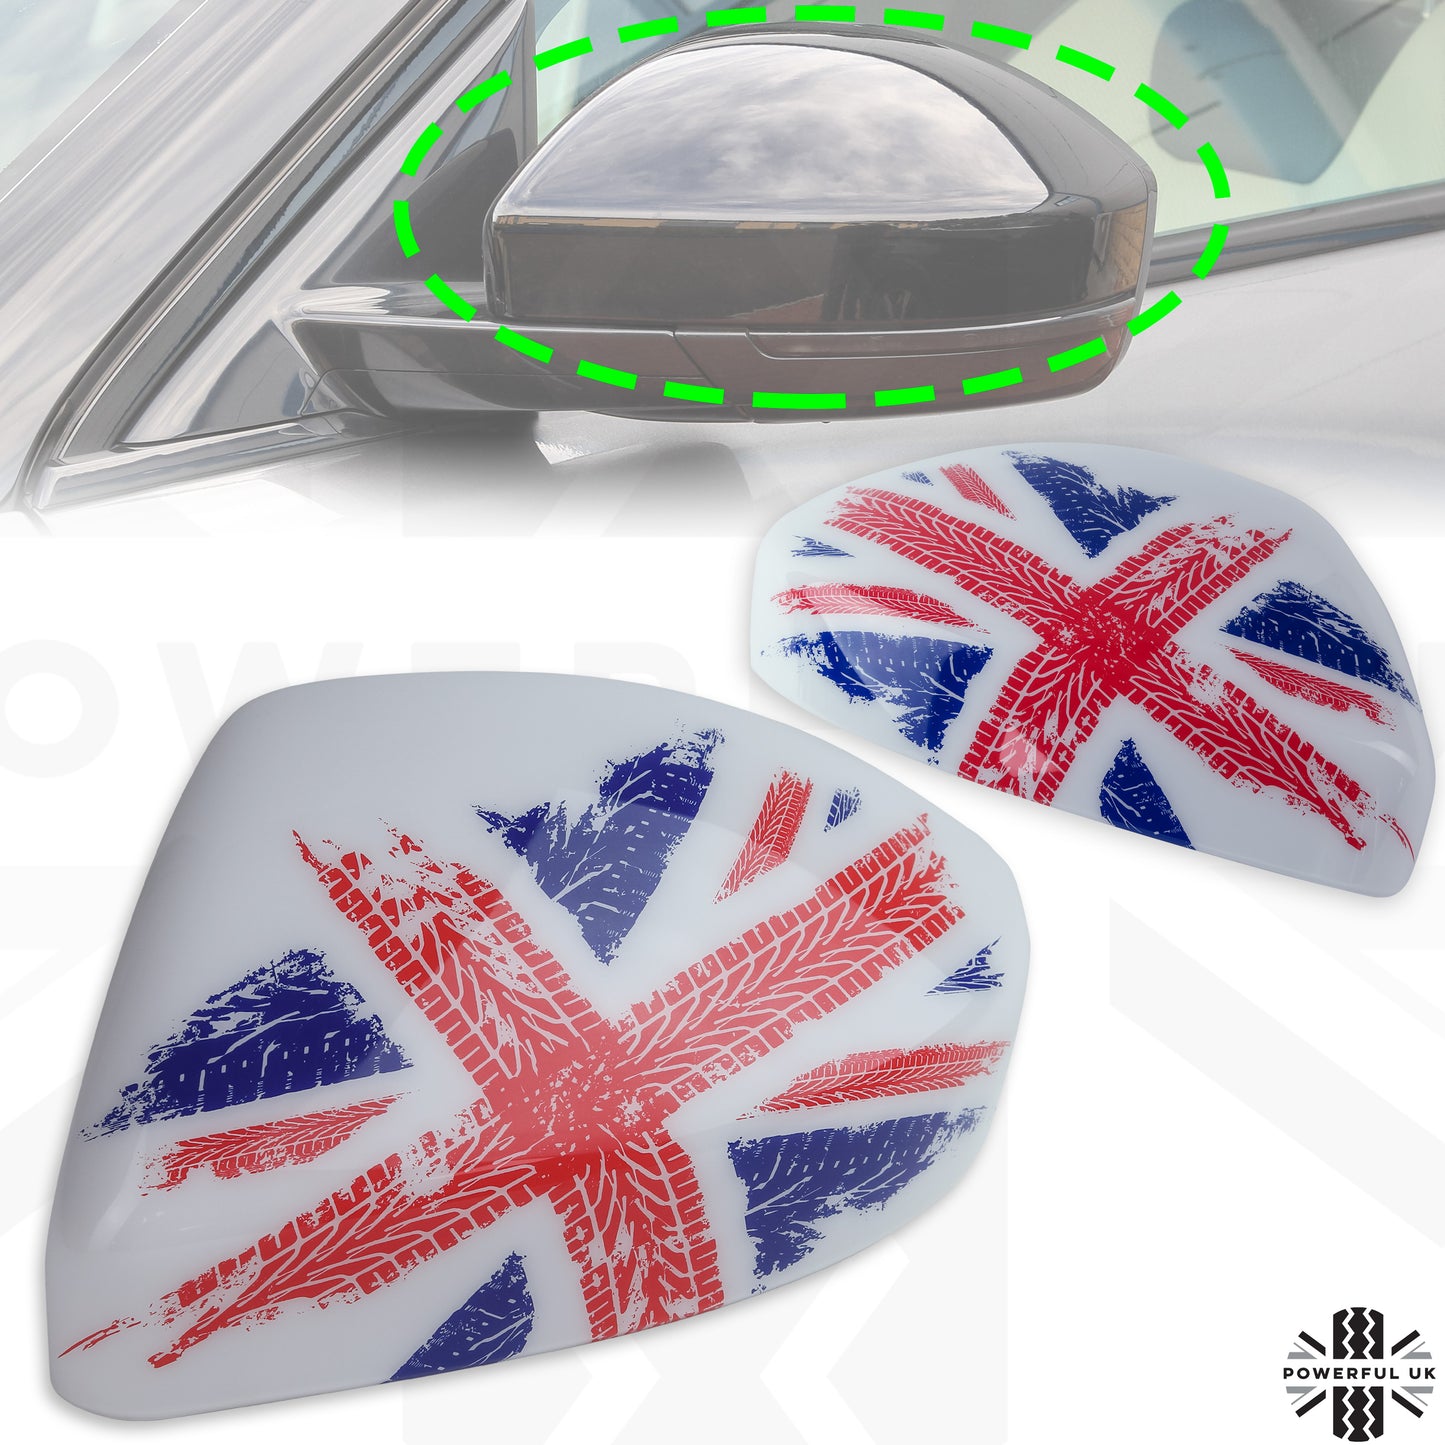 Genuine Replacement Mirror Caps for Range Rover Velar - White with Union Jack design